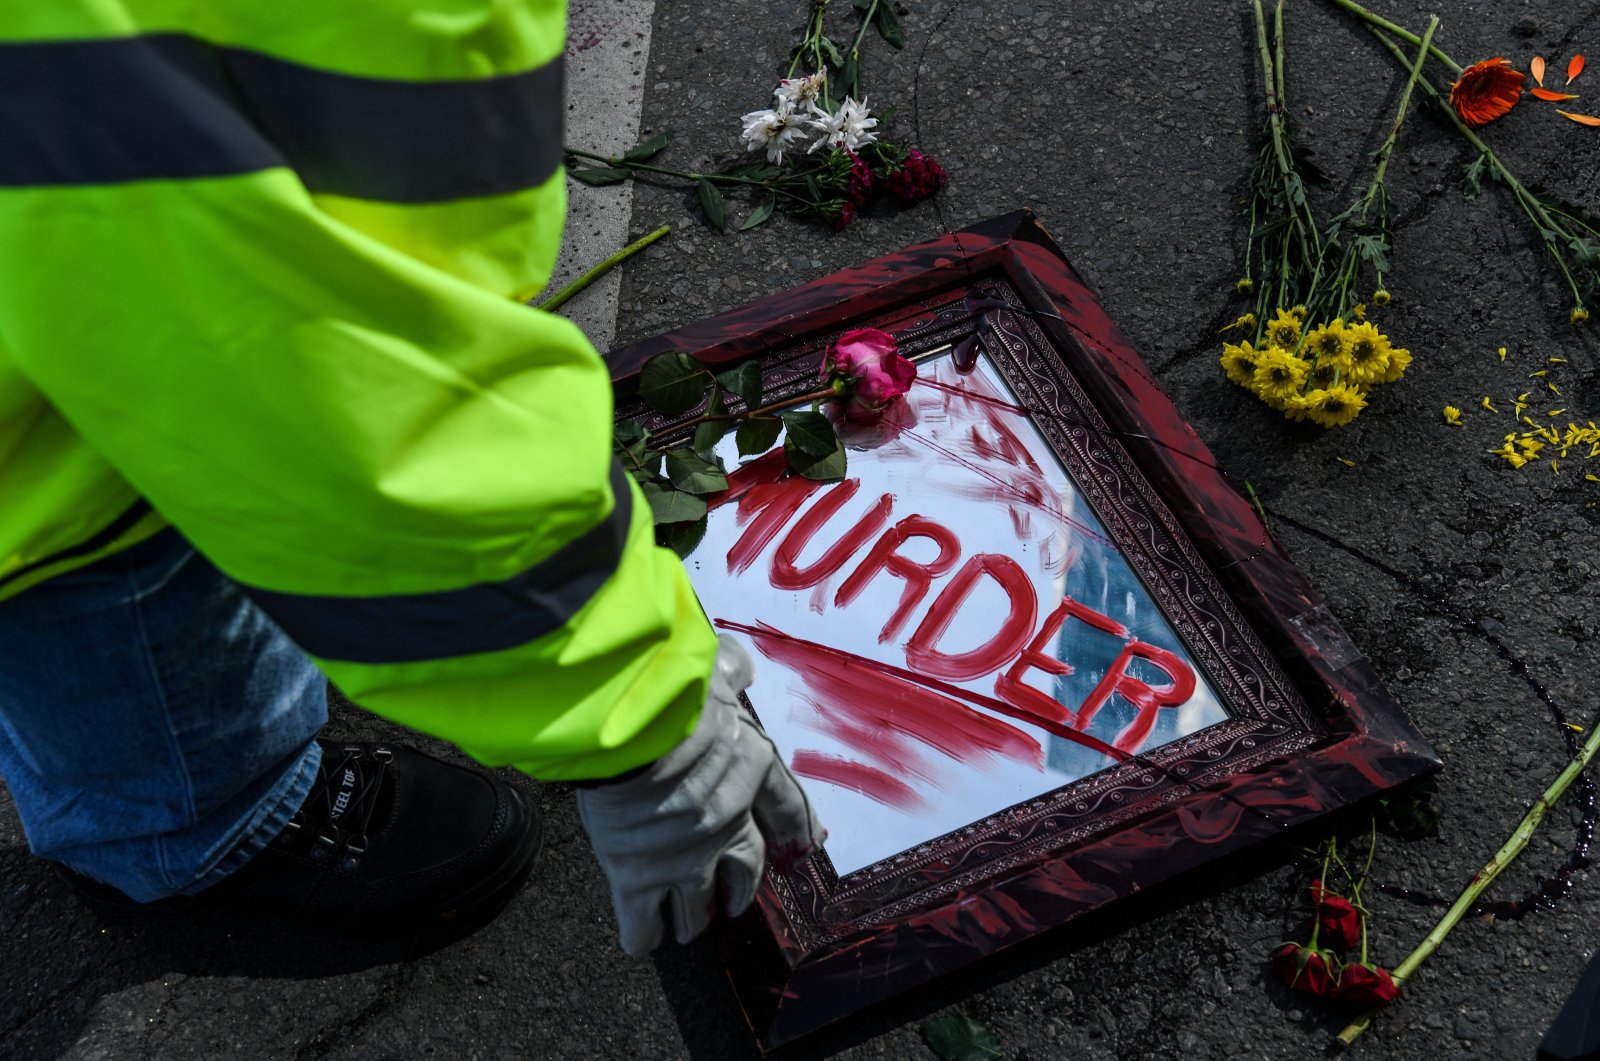 City workers clear out flowers and mirrors placed on the road as part of an art installation outside the Hennepin County Government Center after the first day of jury selection began in the trial of former Minneapolis Police officer Derek Chauvin in Minneapolis, Minnesota, U.S., March 8, 2021. (AFP Photo)